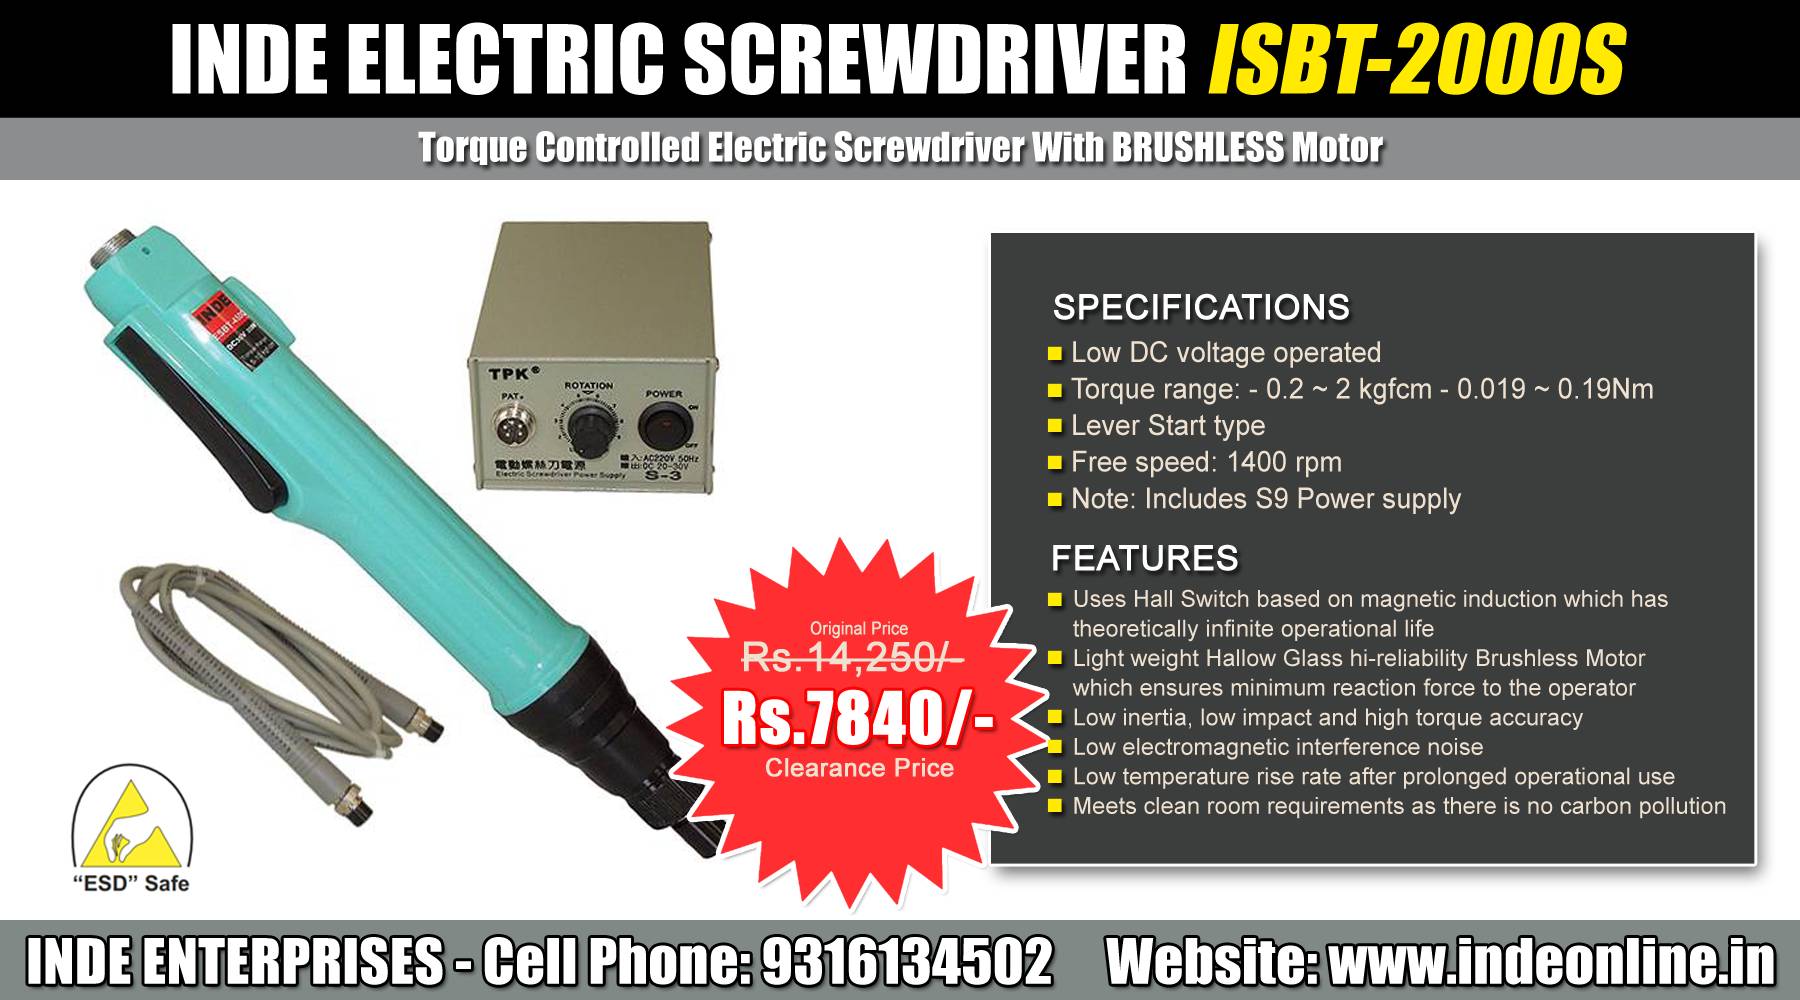 Make in India INDE Electric Screwdriver ISBT-2000S Price Rs.7840/-